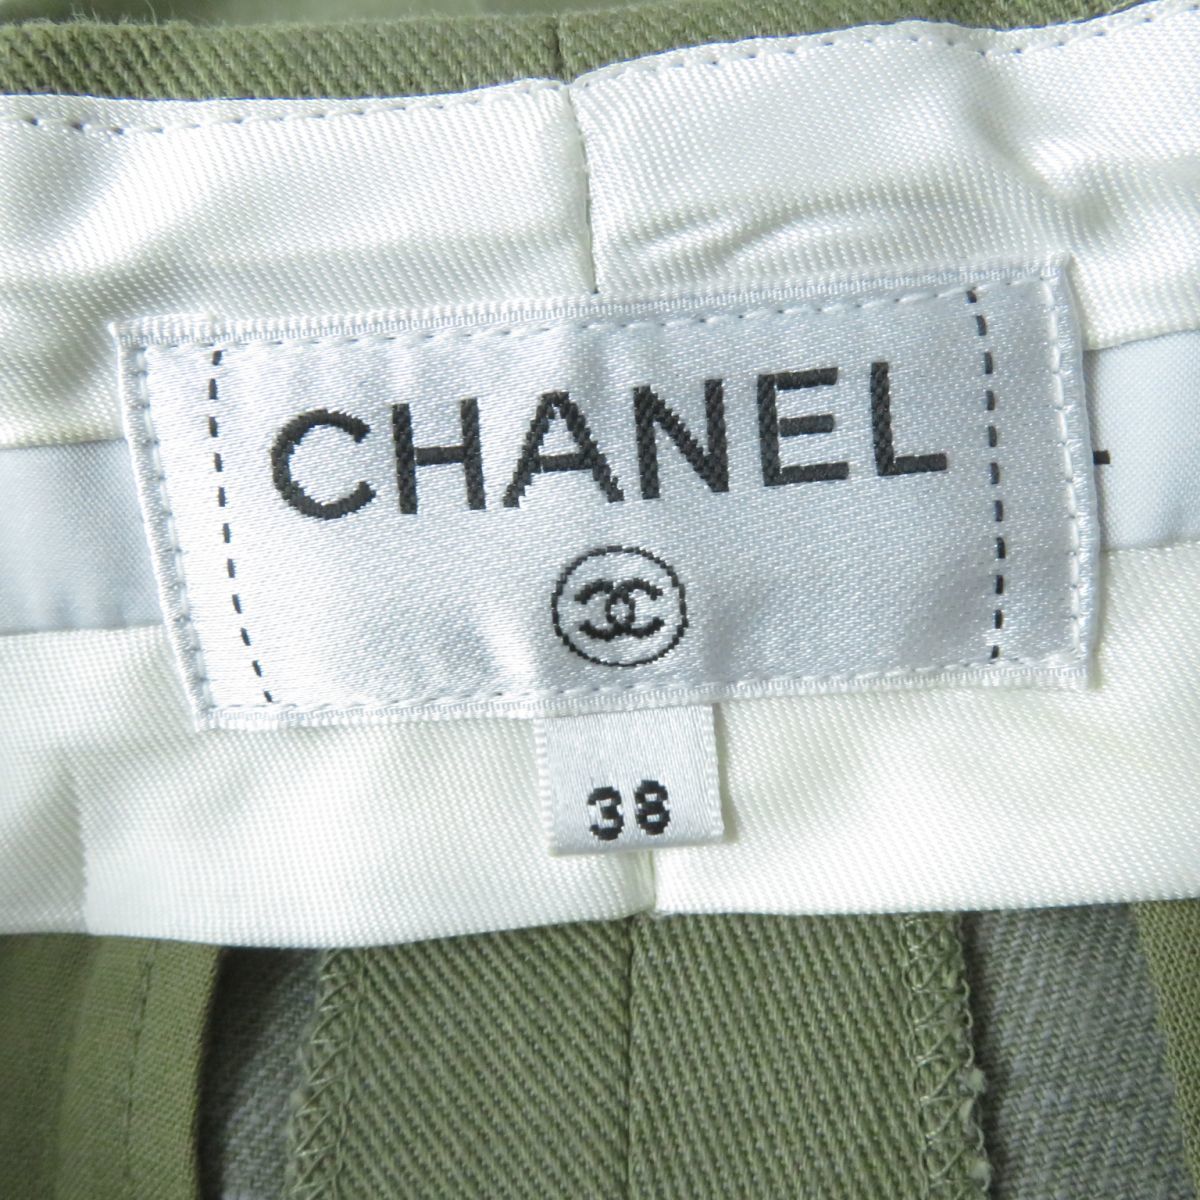  ultimate beautiful goods * regular goods CHANEL Chanel P55496 here Mark button attaching cotton 100% short pants / bottoms khaki 38 lady's France made 